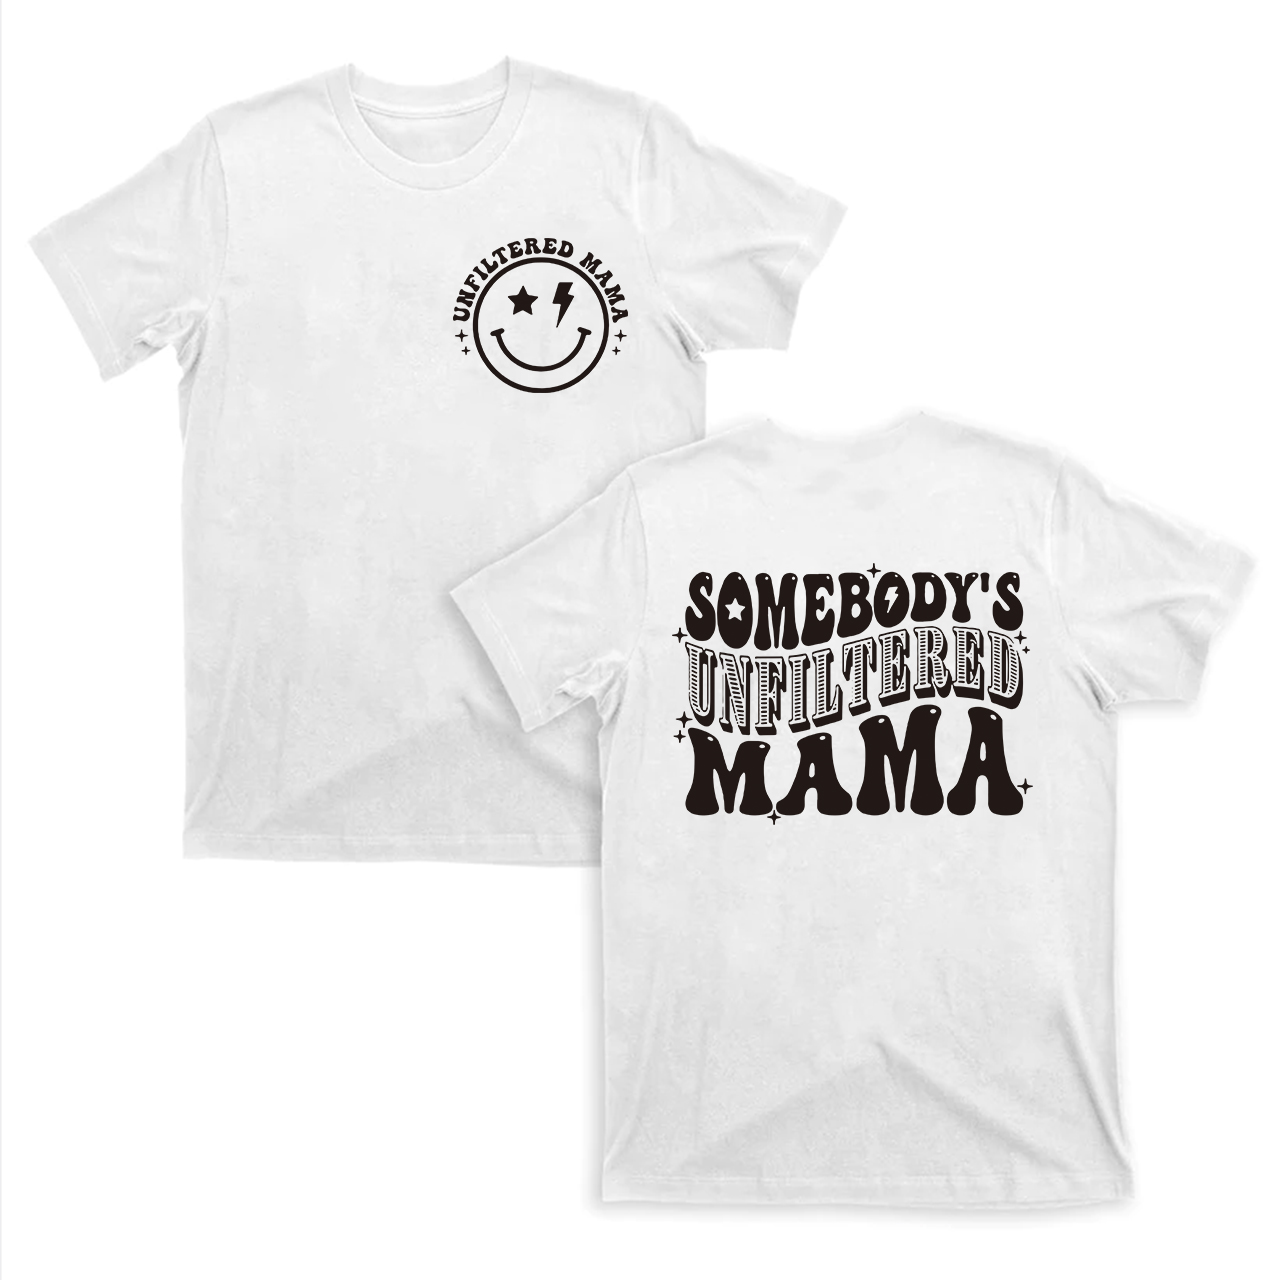 Somebody's Unfiltered Mama Shirt